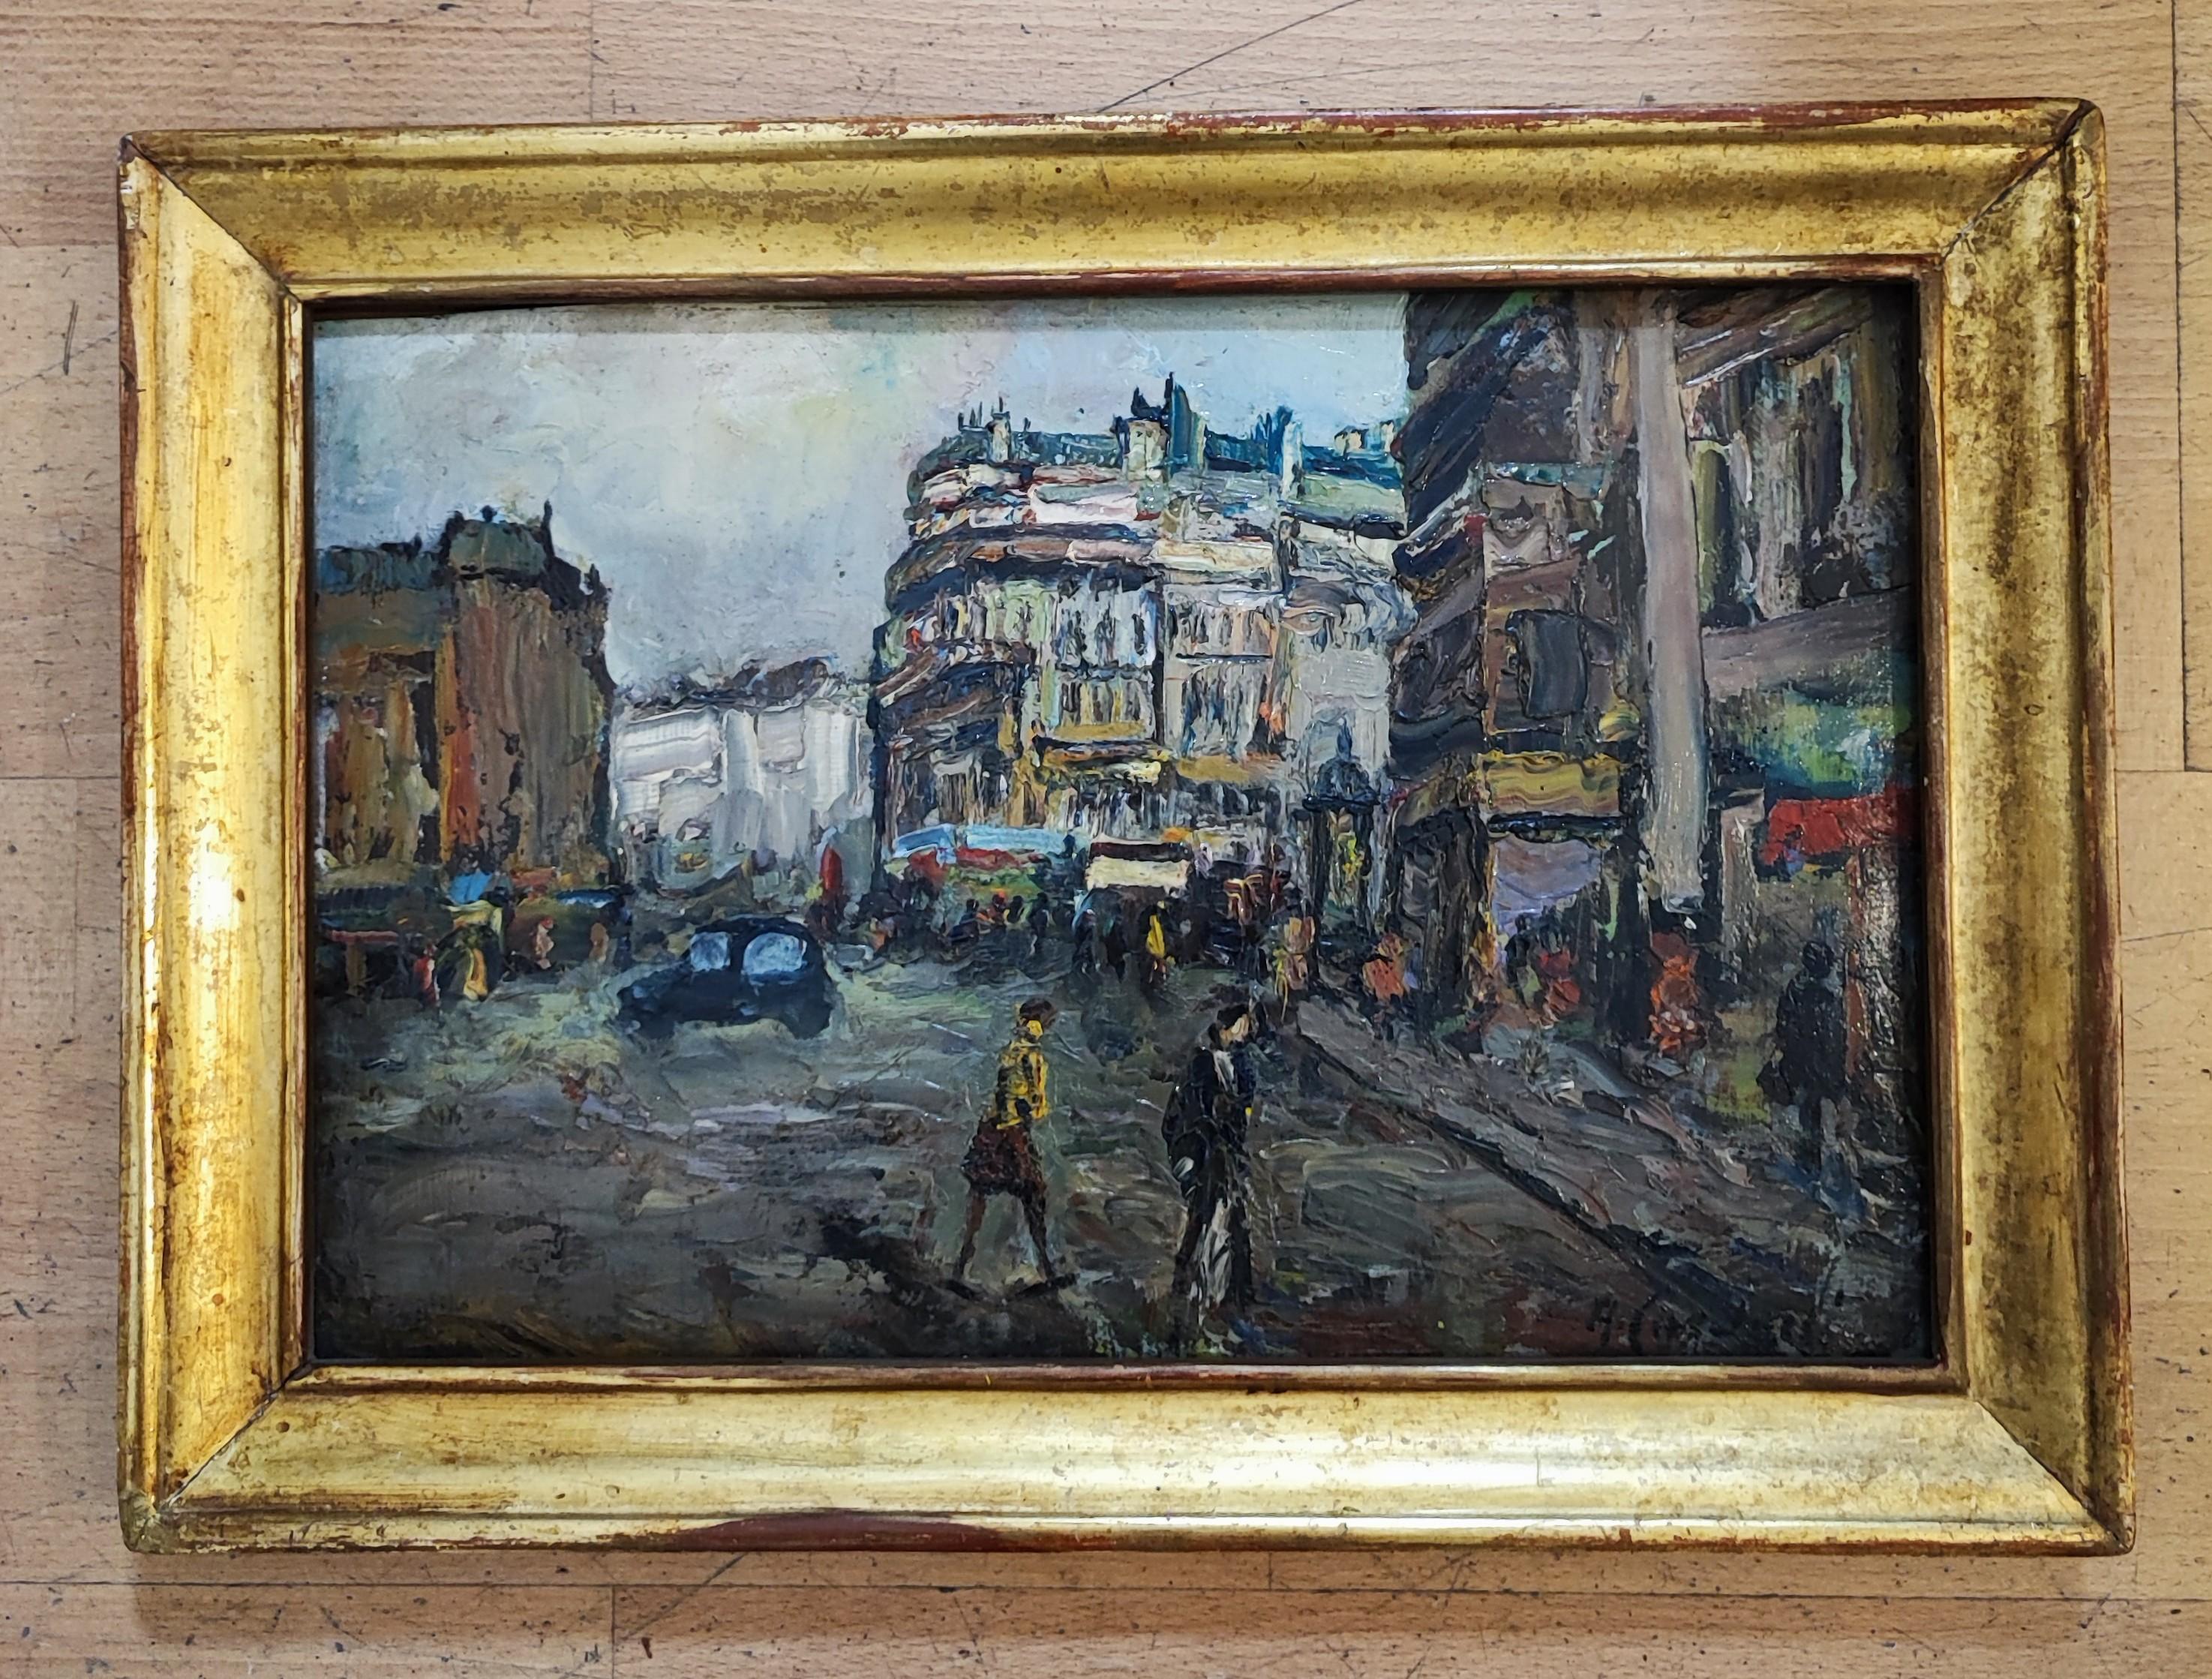 Downtown - Painting by Adolfo Carducci